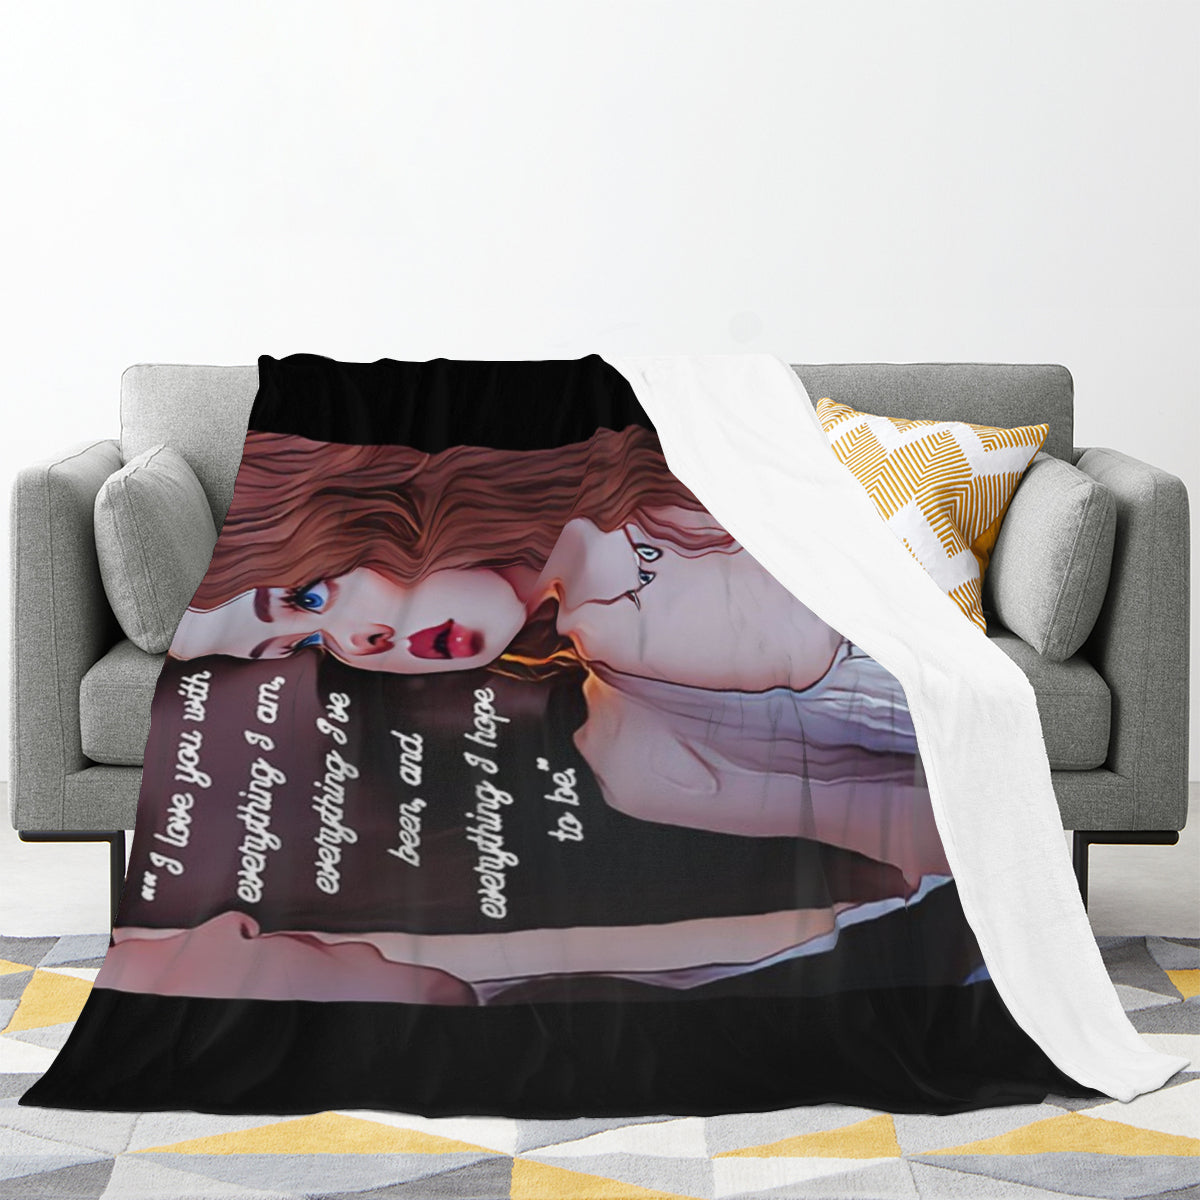 I Love You With Everything I Am Colin and Penelope Bridgerton Throw Blanket